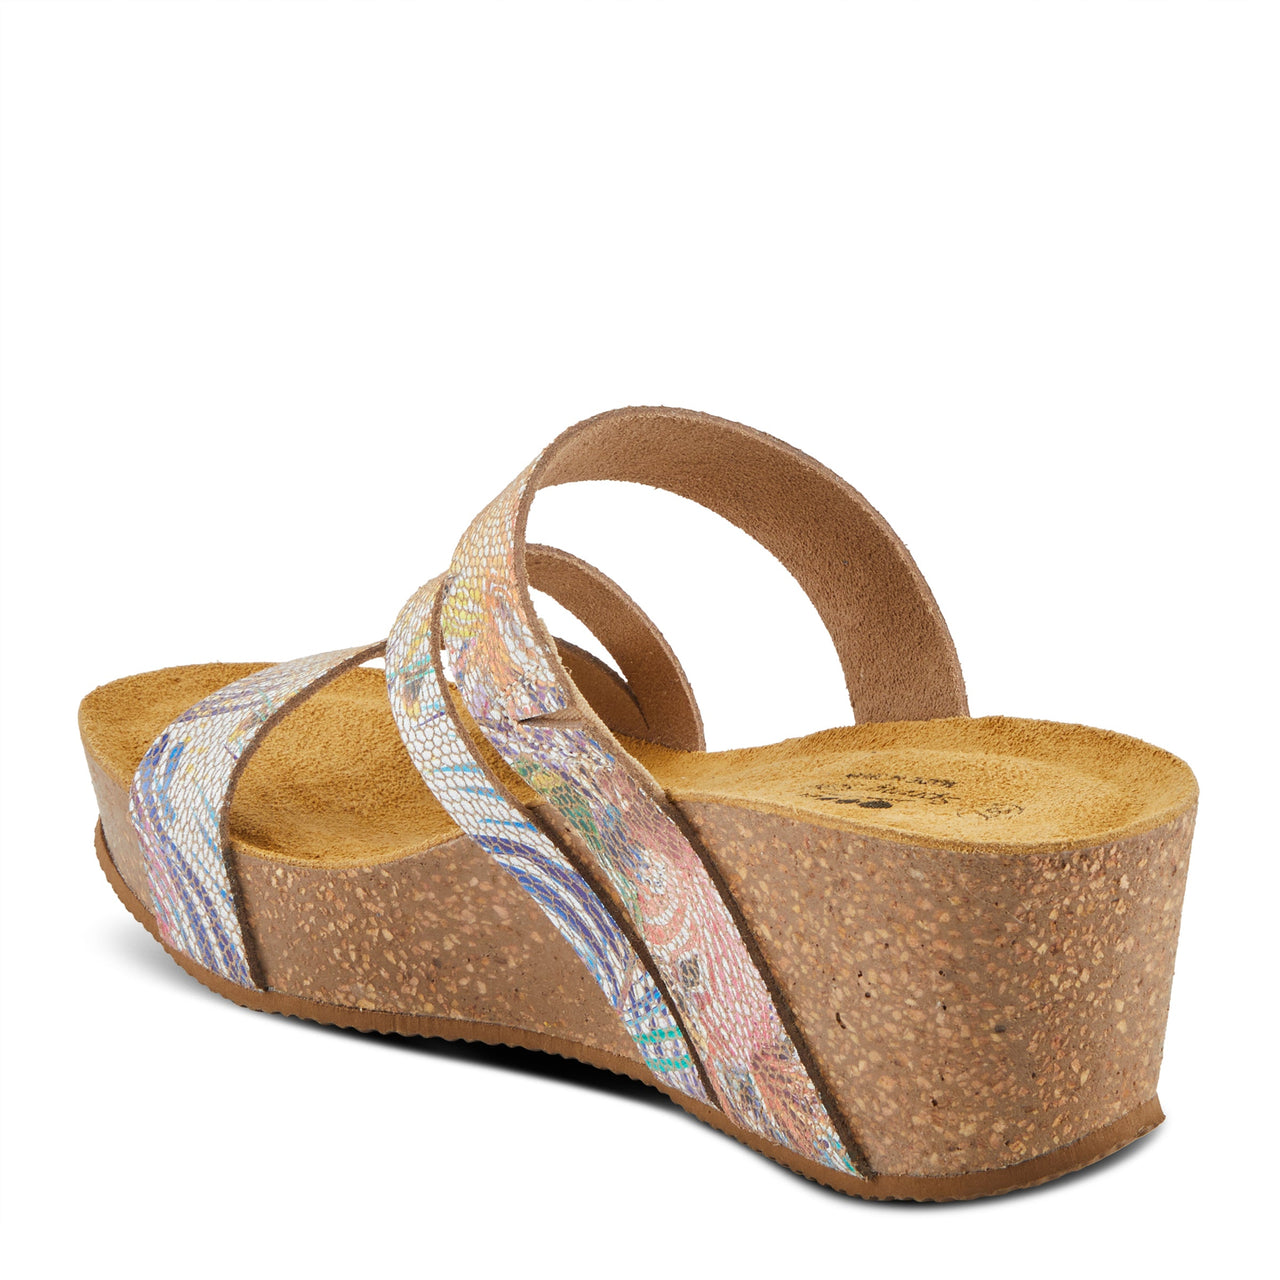  Spring Step Butterpea Sandals perfect for casual summer outings and beach vacations